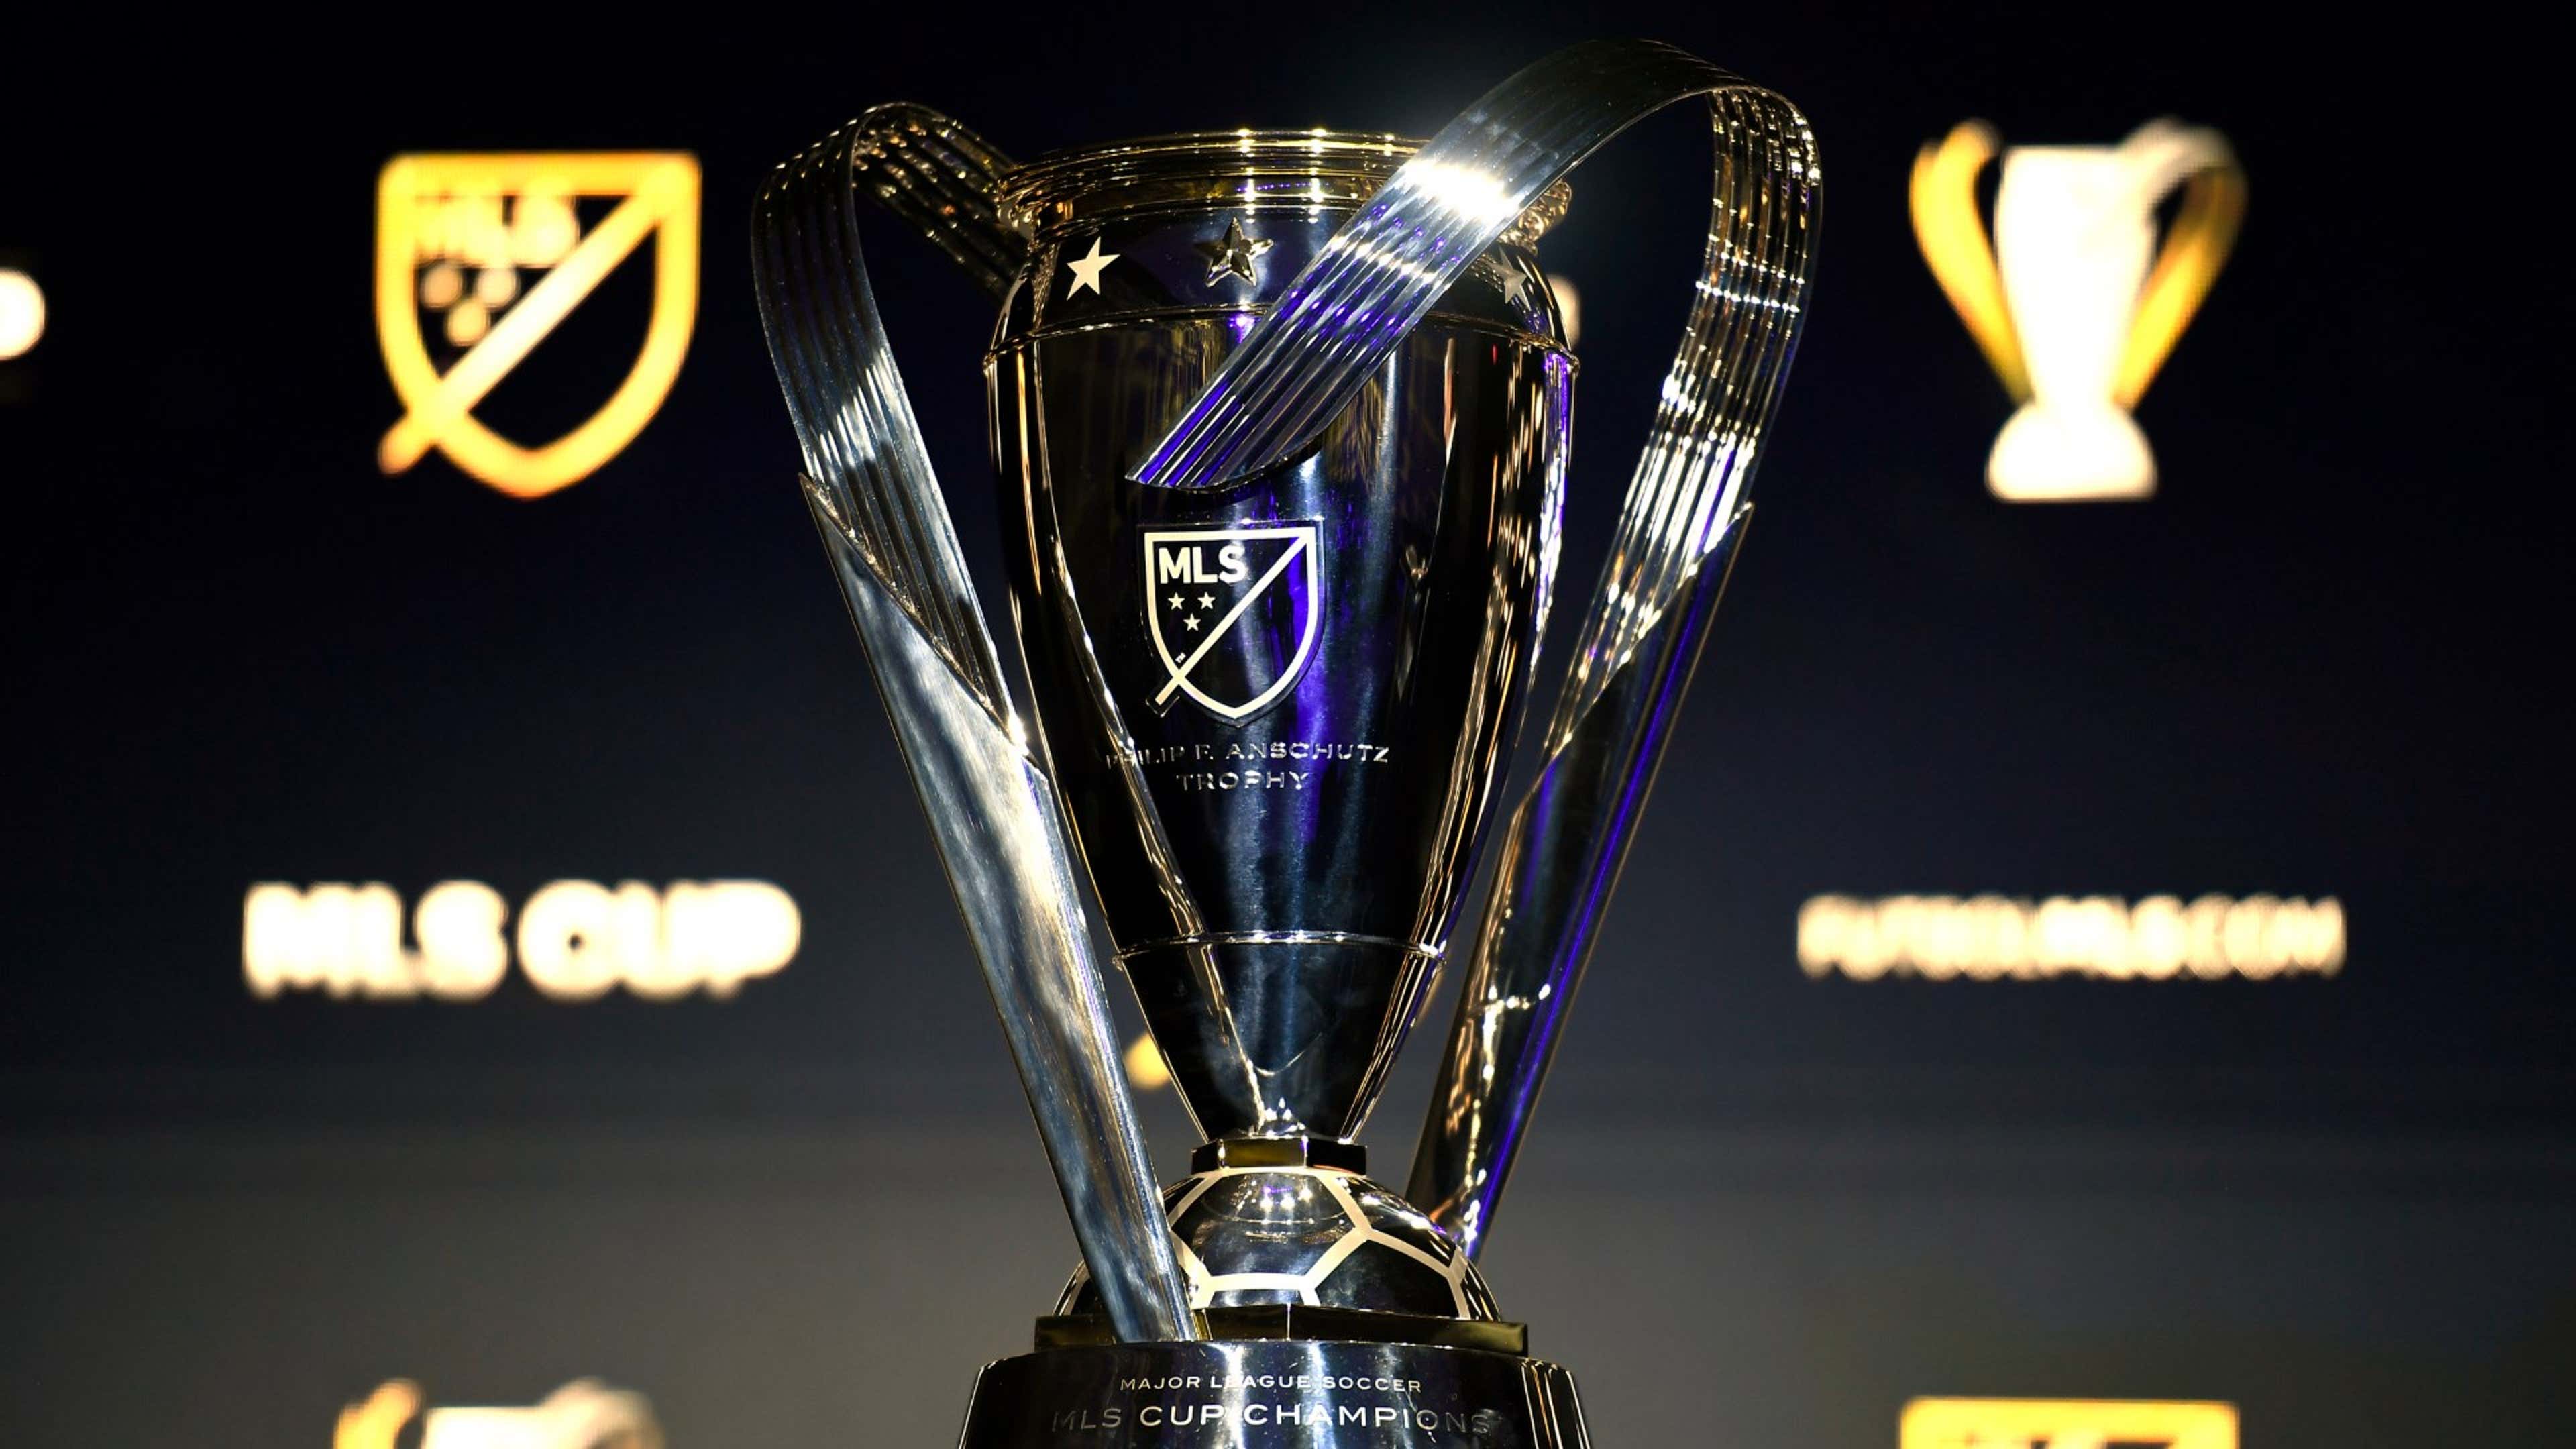 Where is the 2023 Leagues Cup final being played? - AS USA